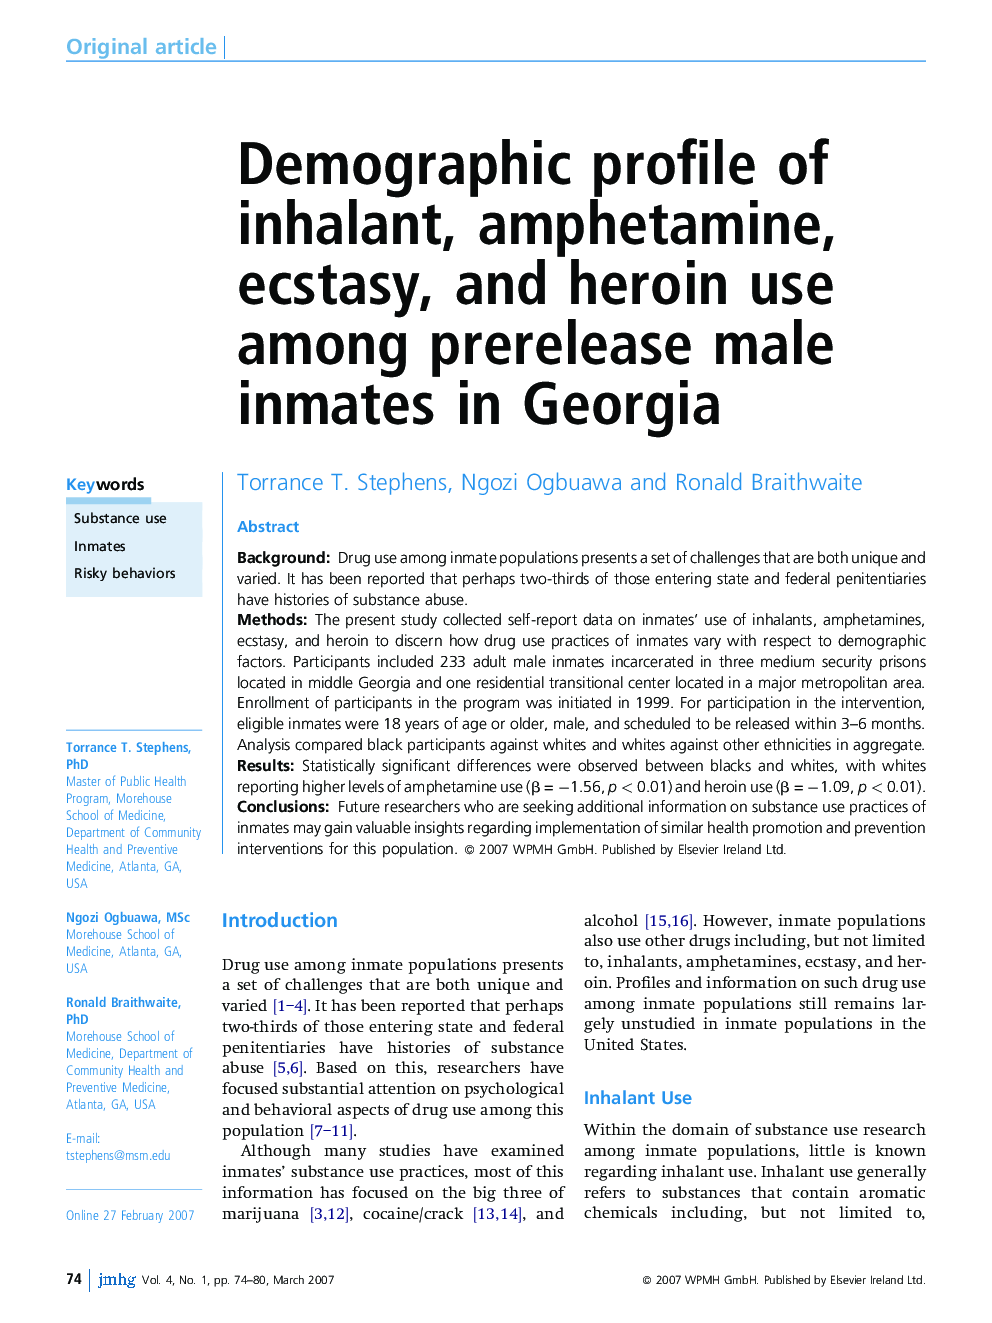 Demographic profile of inhalant, amphetamine, ecstasy, and heroin use among prerelease male inmates in Georgia